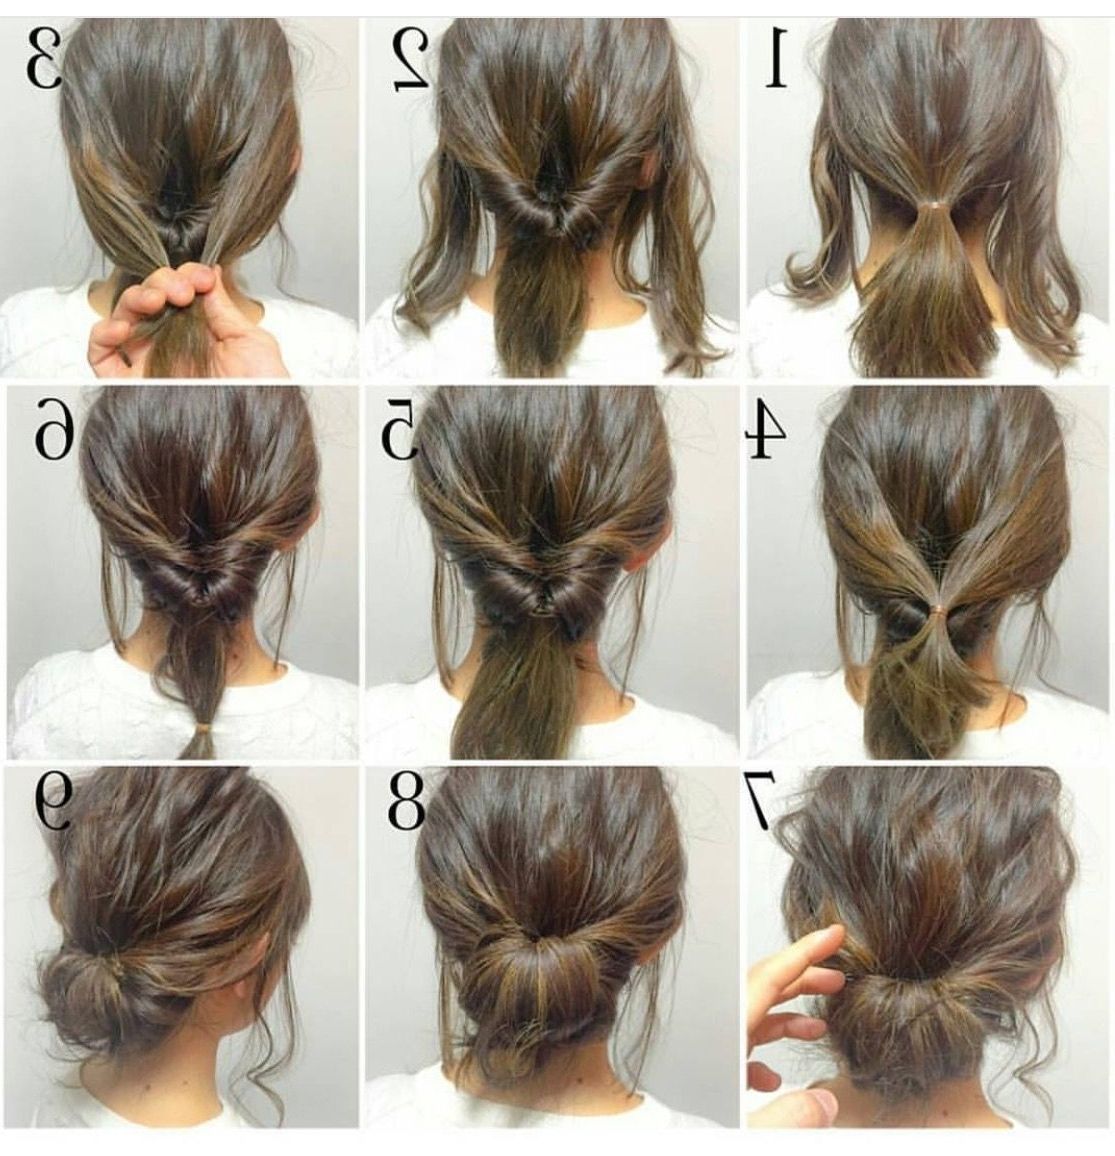 4 Messy Updos For Long Hair | Hairz | Pinterest | Updos, Hair Style With Easy Updo Long Hairstyles (View 10 of 15)